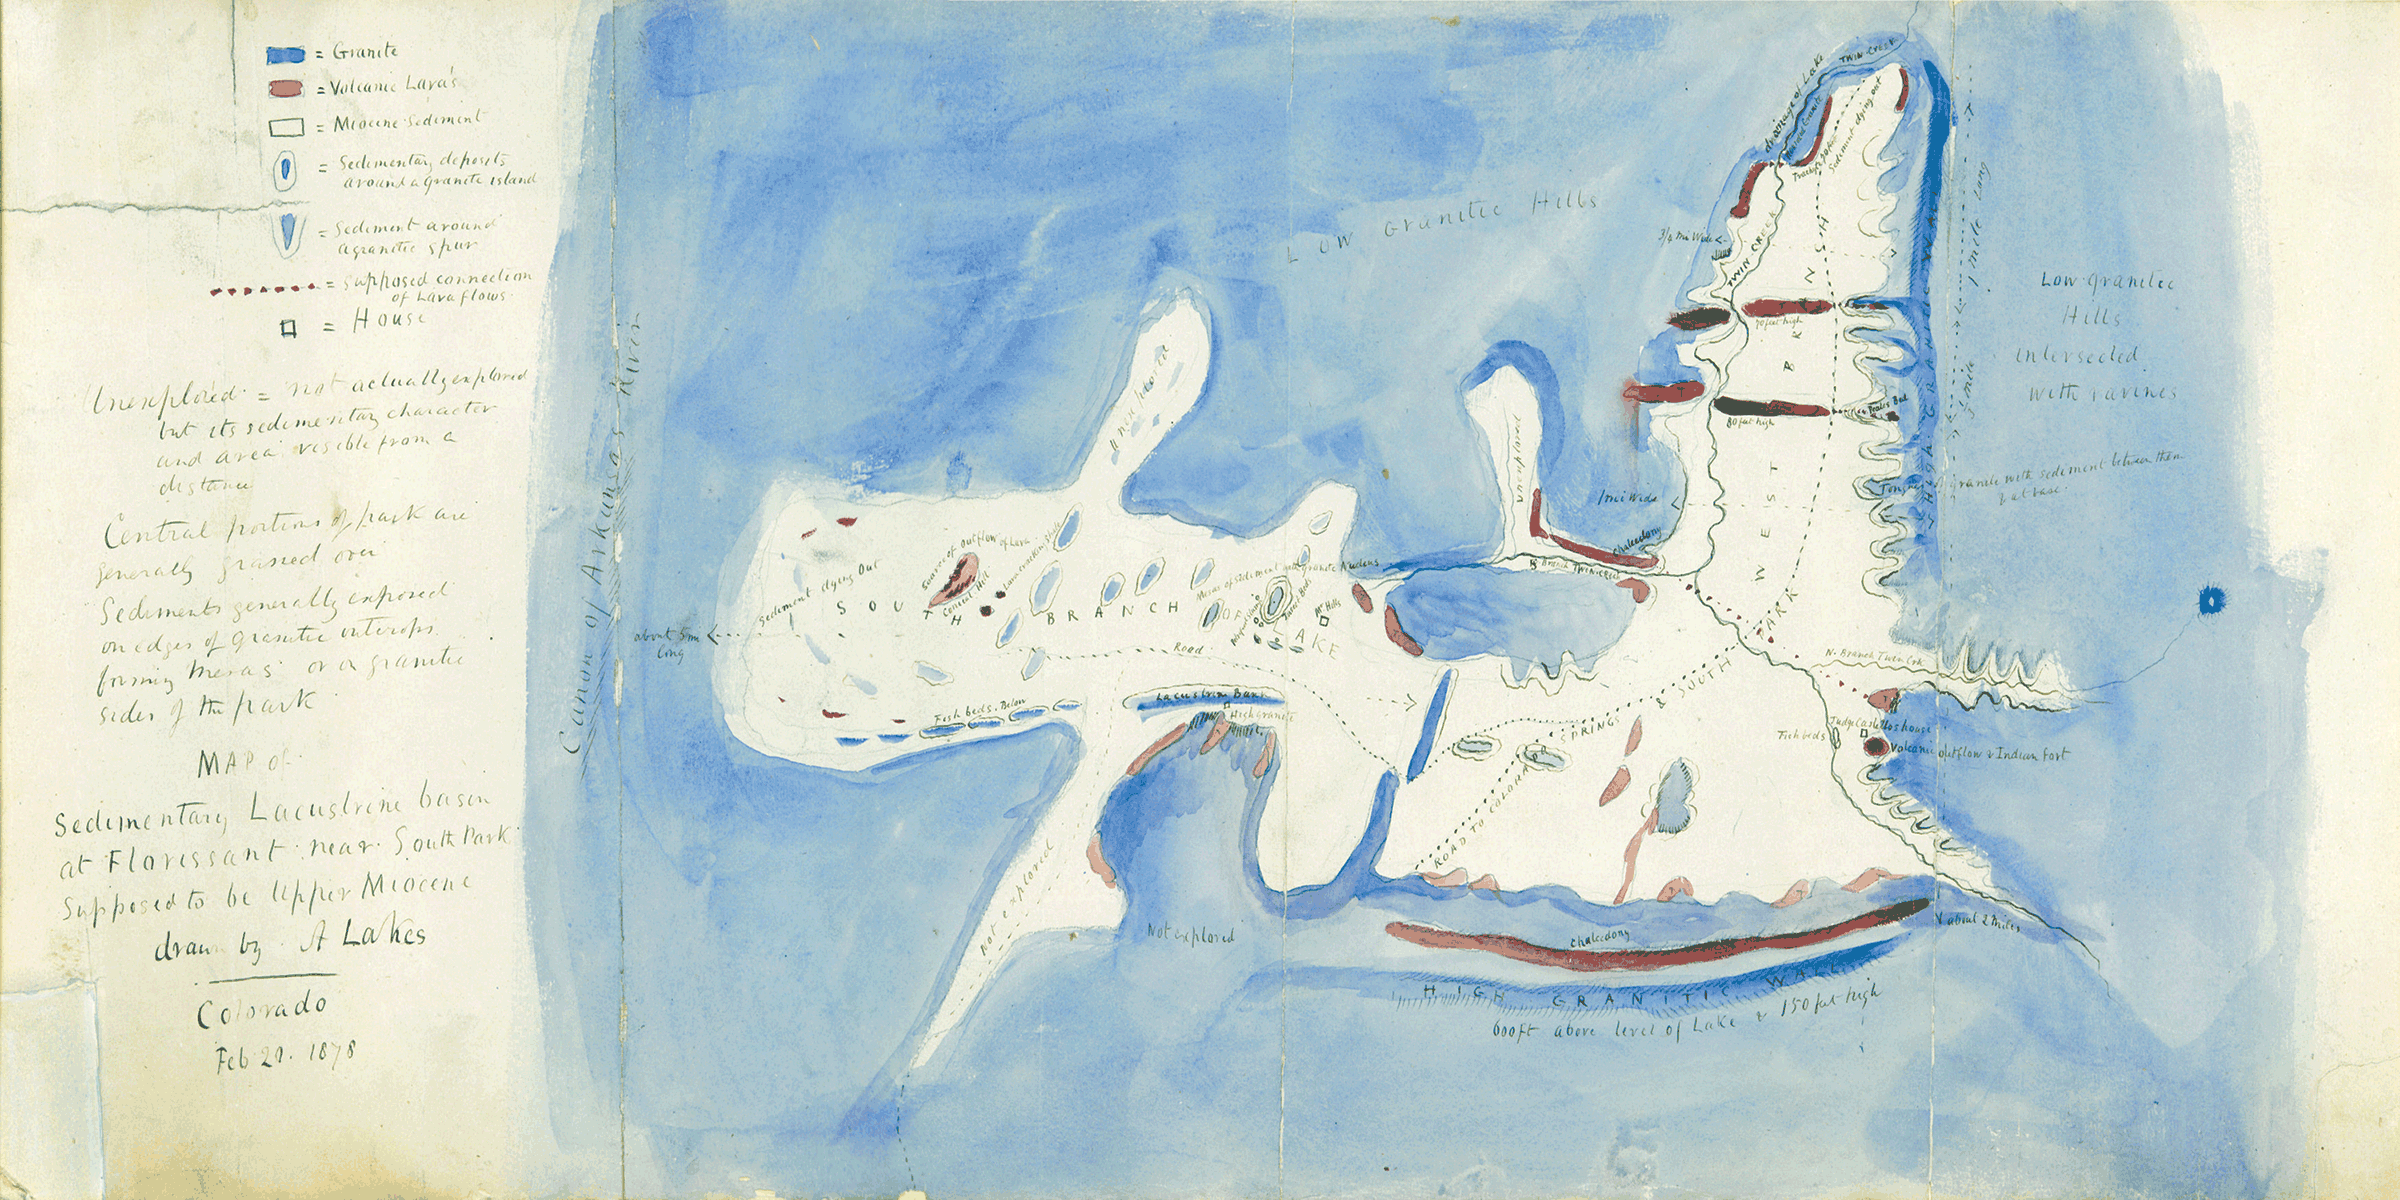 A watercolor geologic map of the Florissant Valley by Arthur Lakes.